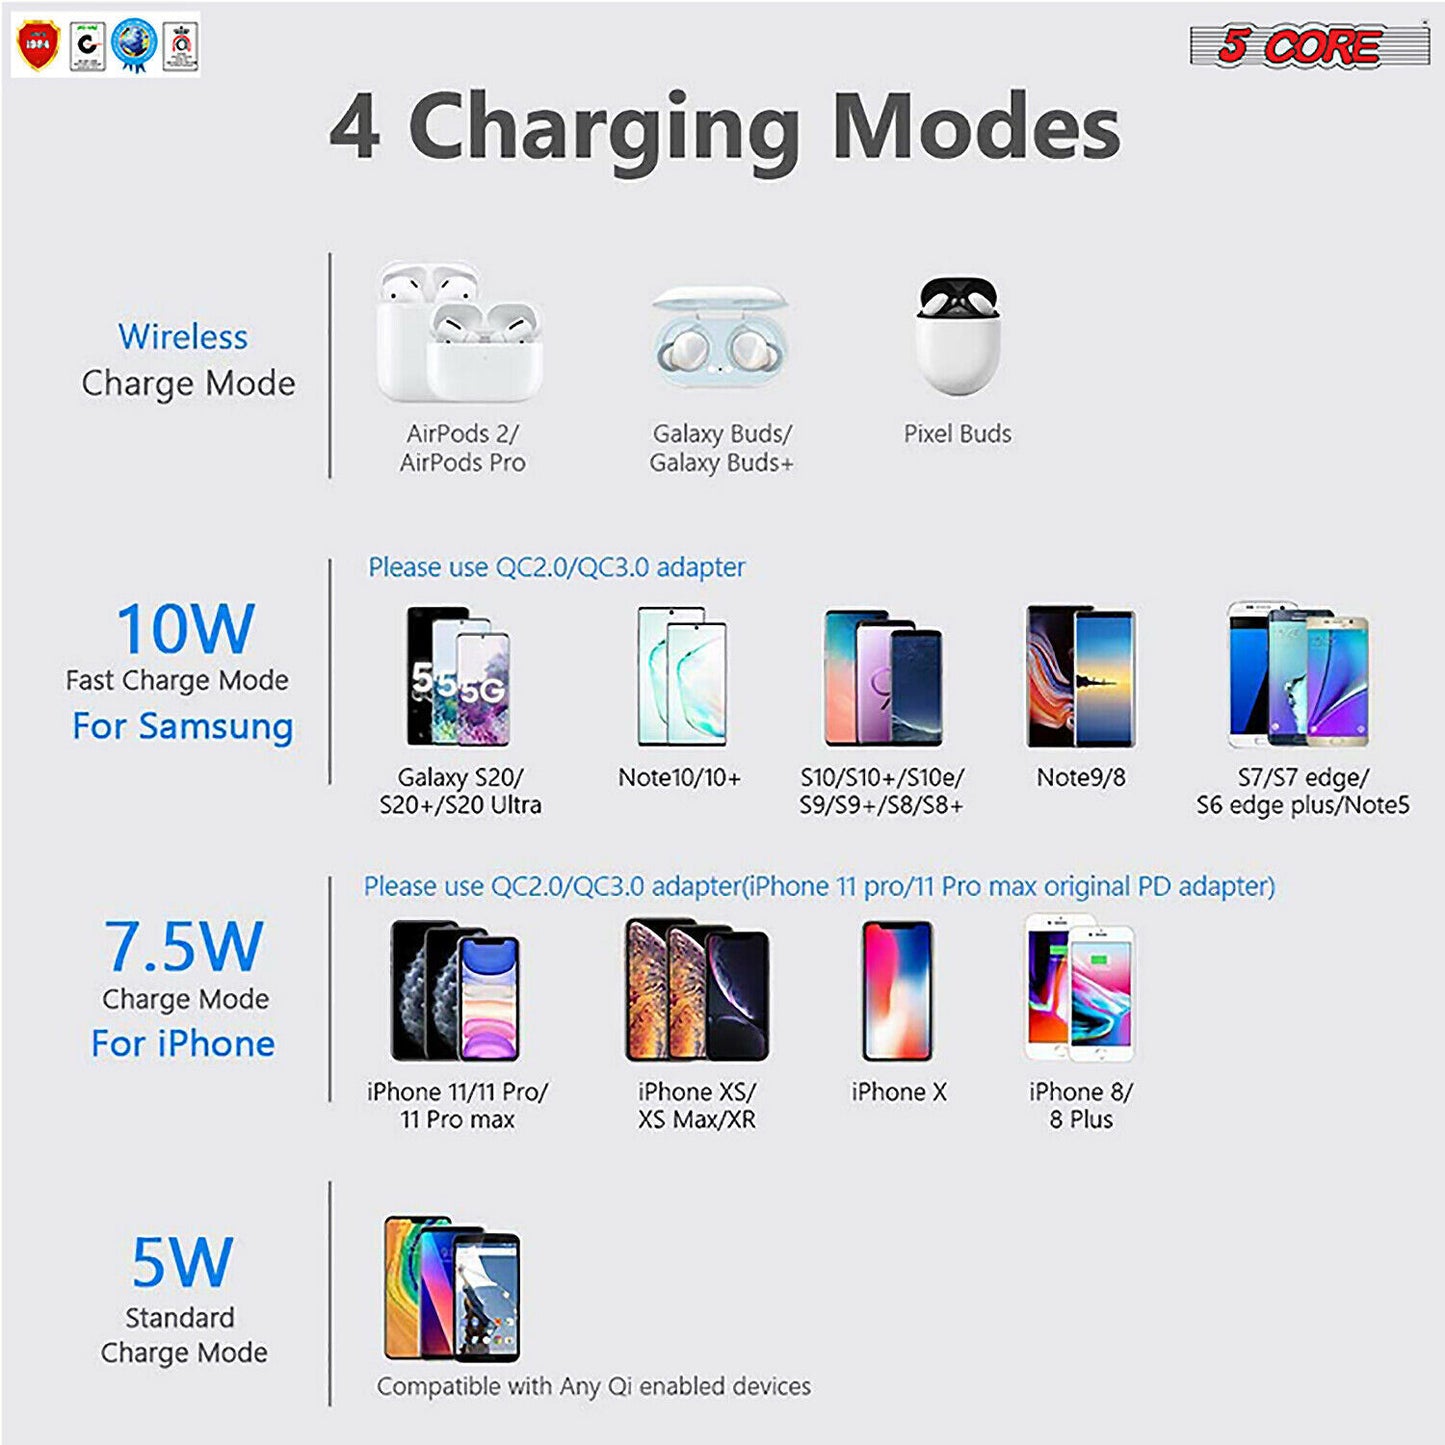 Wireless Fast Charger Pad Qi 15W Boost Charge for iPhone Samsung Slim Wire Less Charging USB-C 2020 White 5 Core CDKW04 W